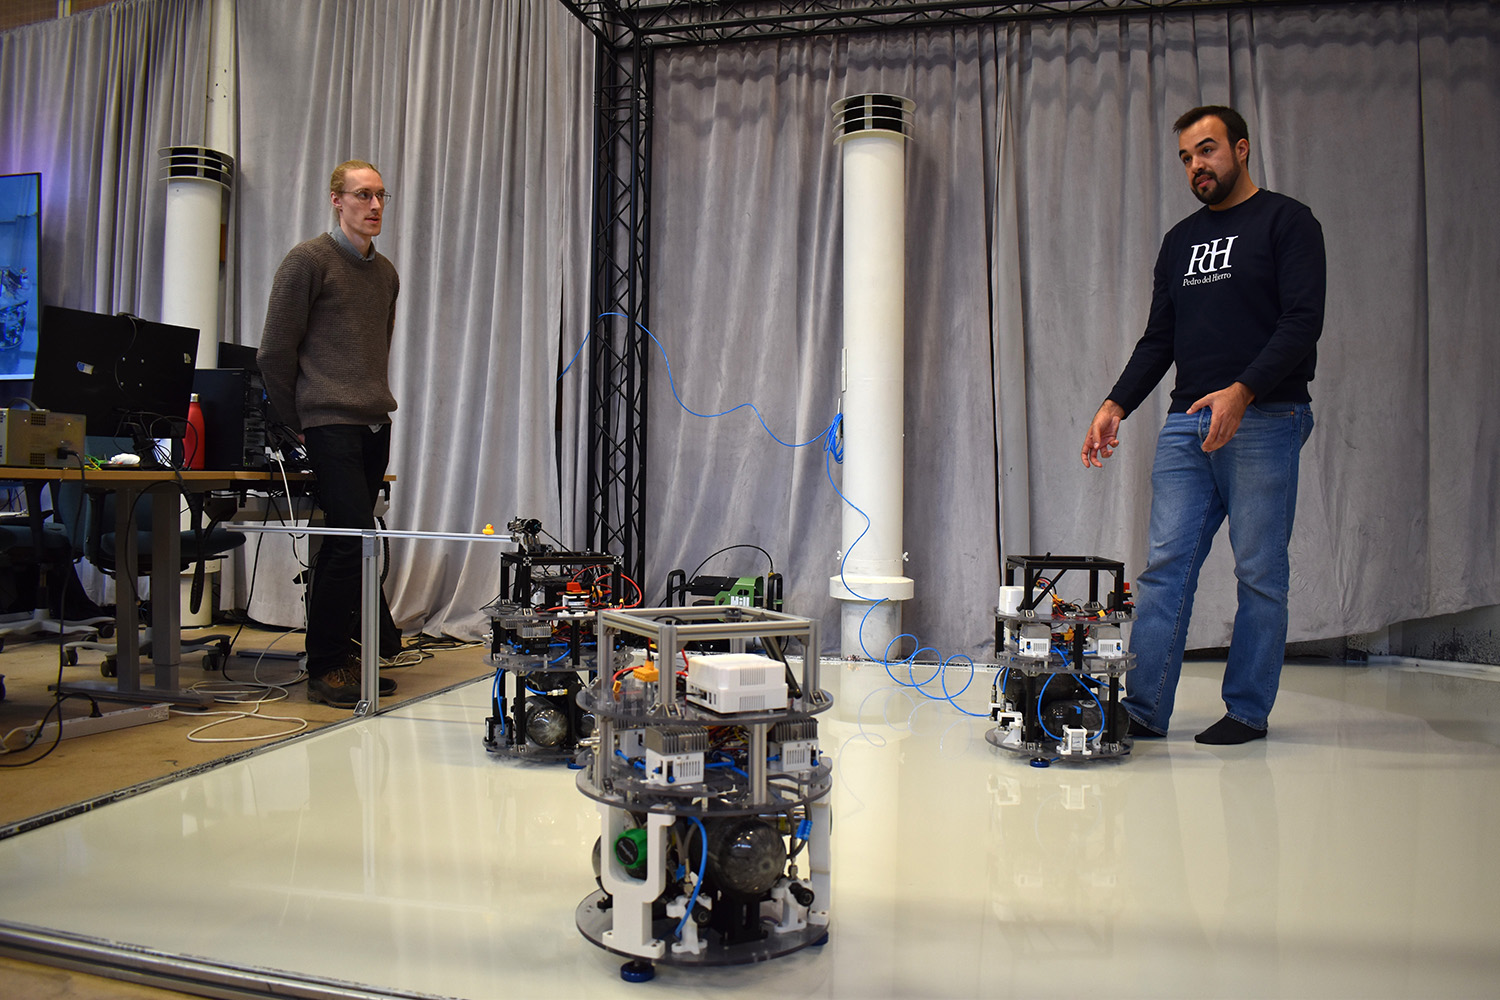 Spacebots in action. From left: PhD student Elias Krantz (KTH) and PhD student Pedro Roque (KTH).